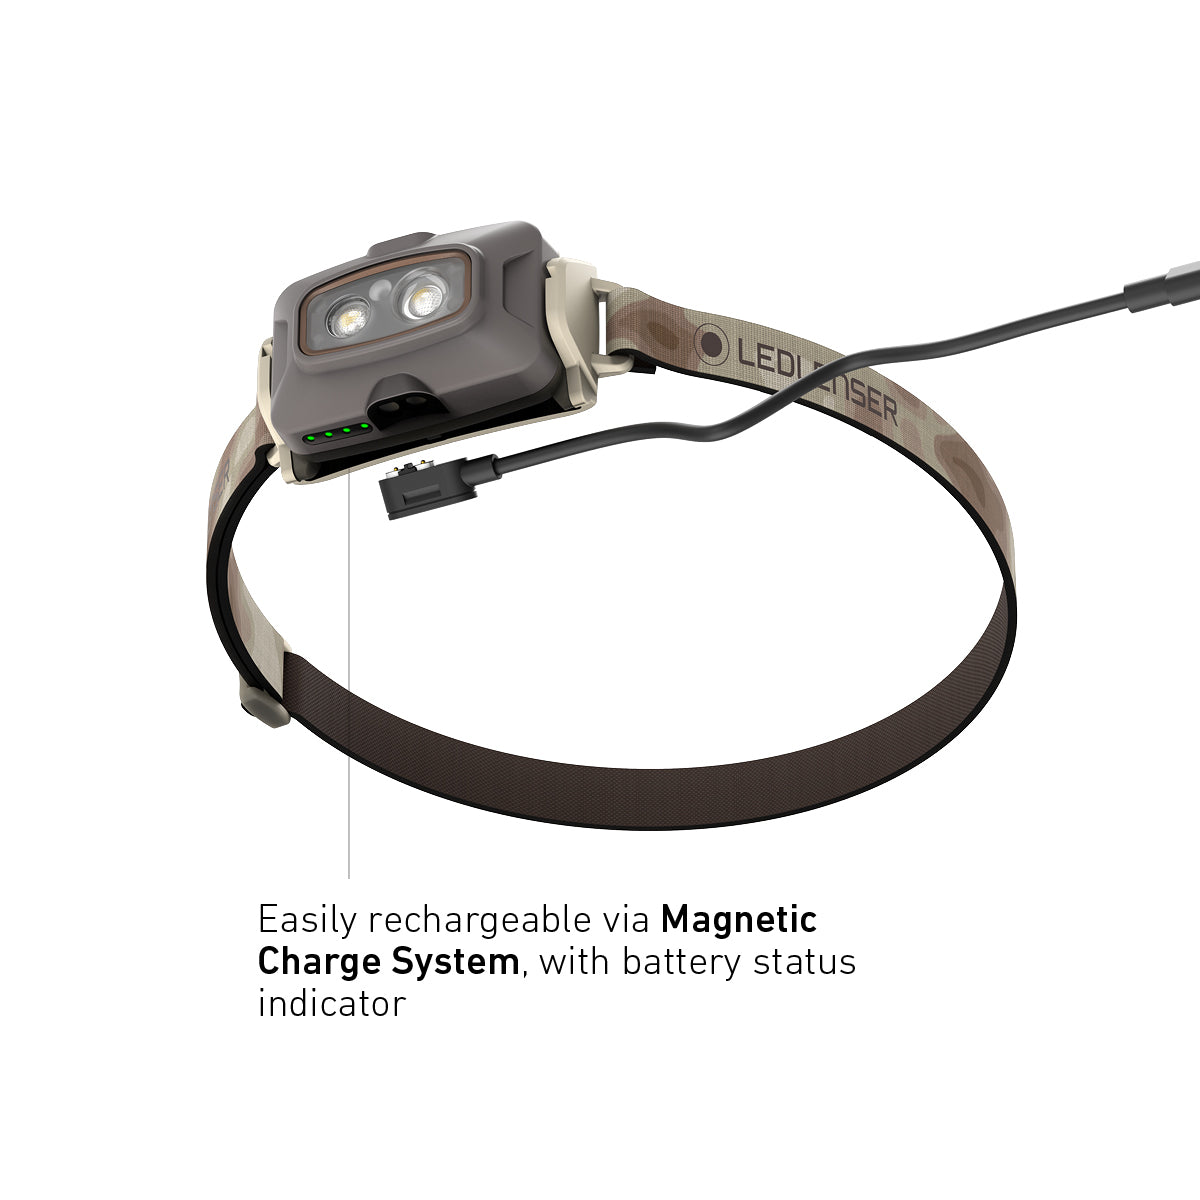 HF4R SIGNATURE Rechargeable Head Torch